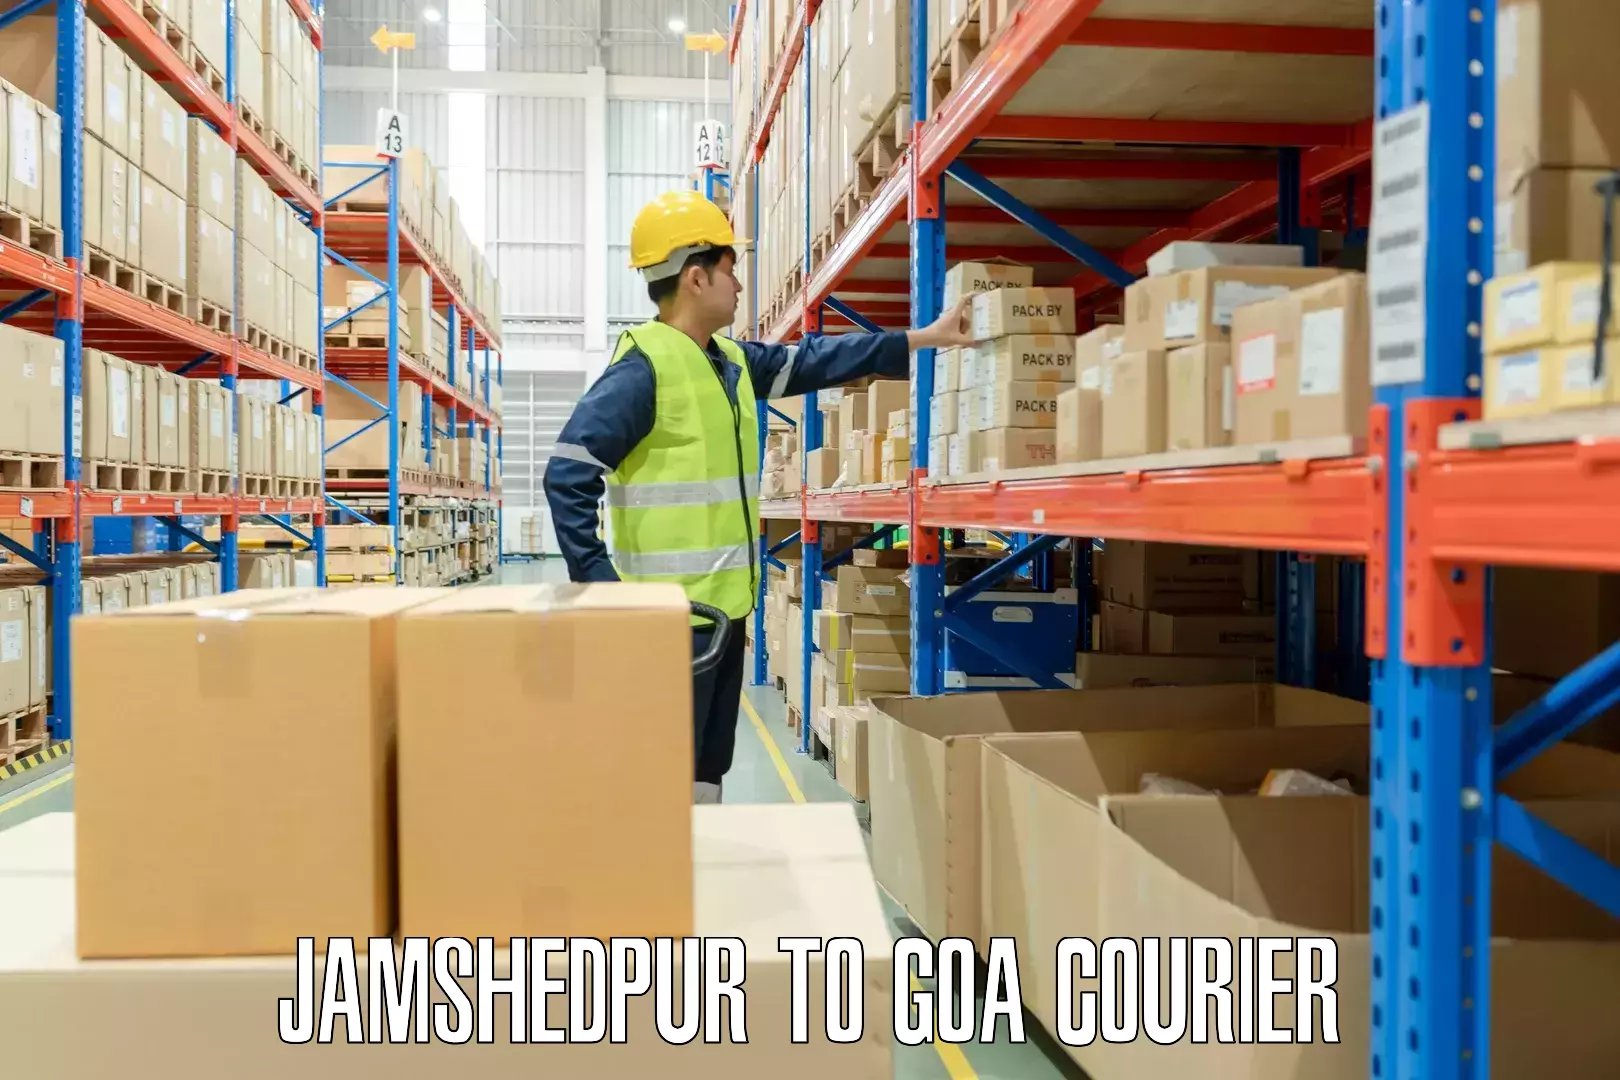 Luggage delivery app Jamshedpur to Goa